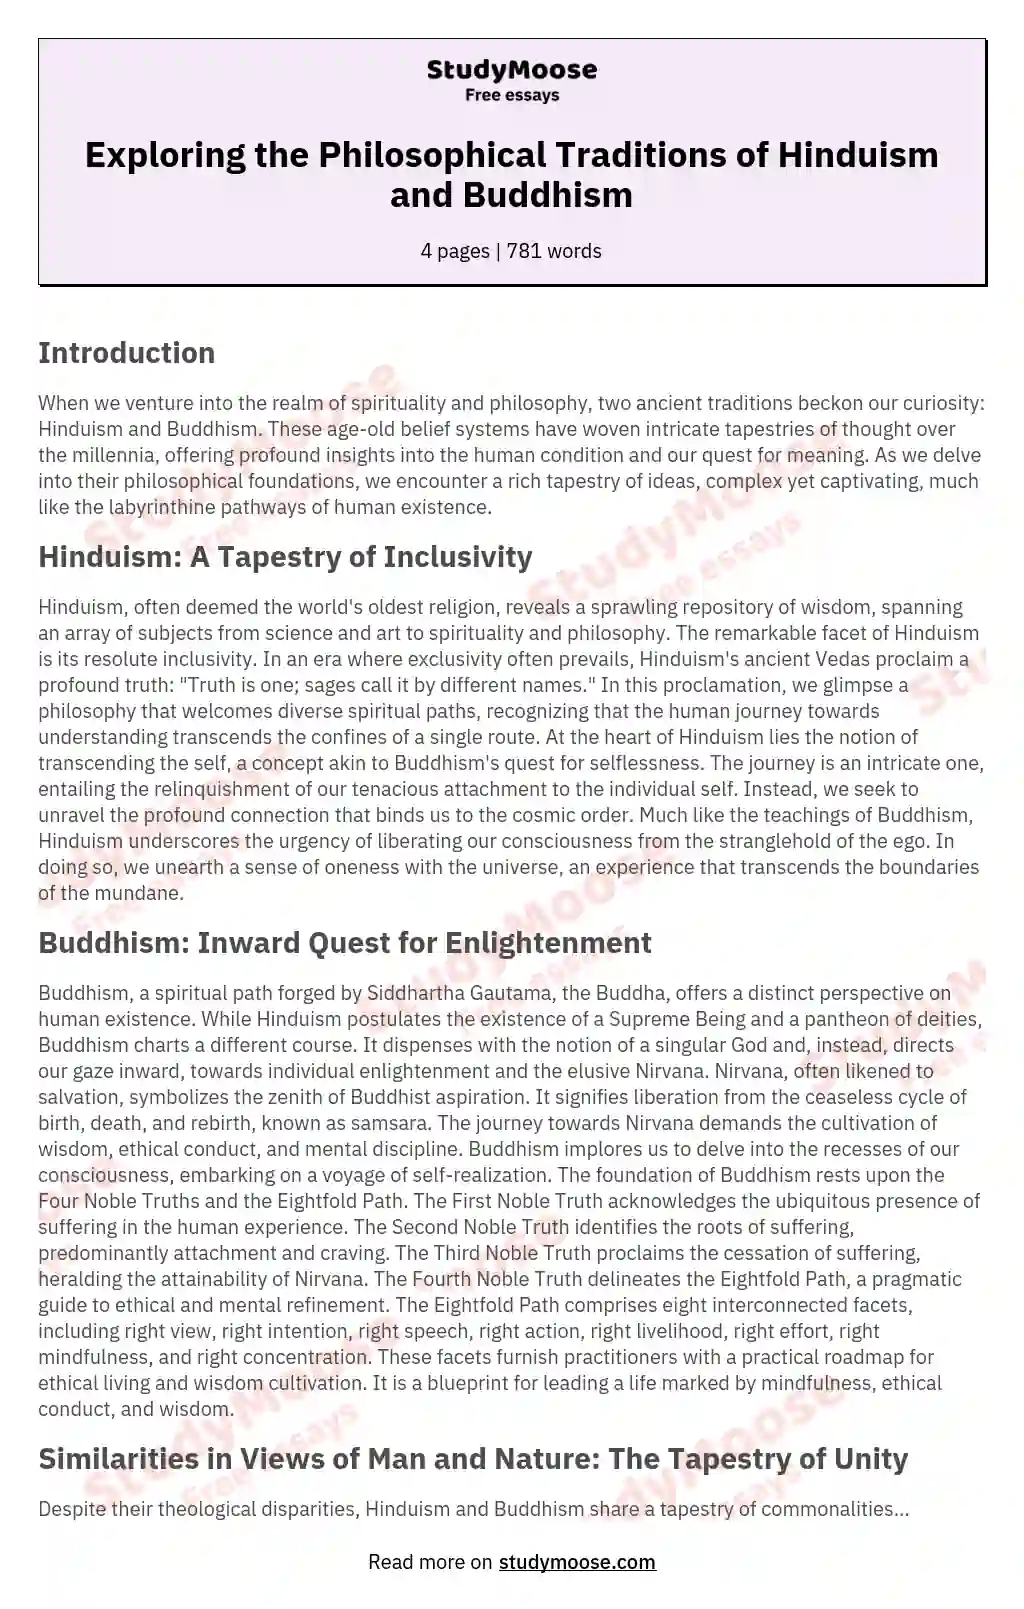 Exploring the Philosophical Traditions of Hinduism and Buddhism essay